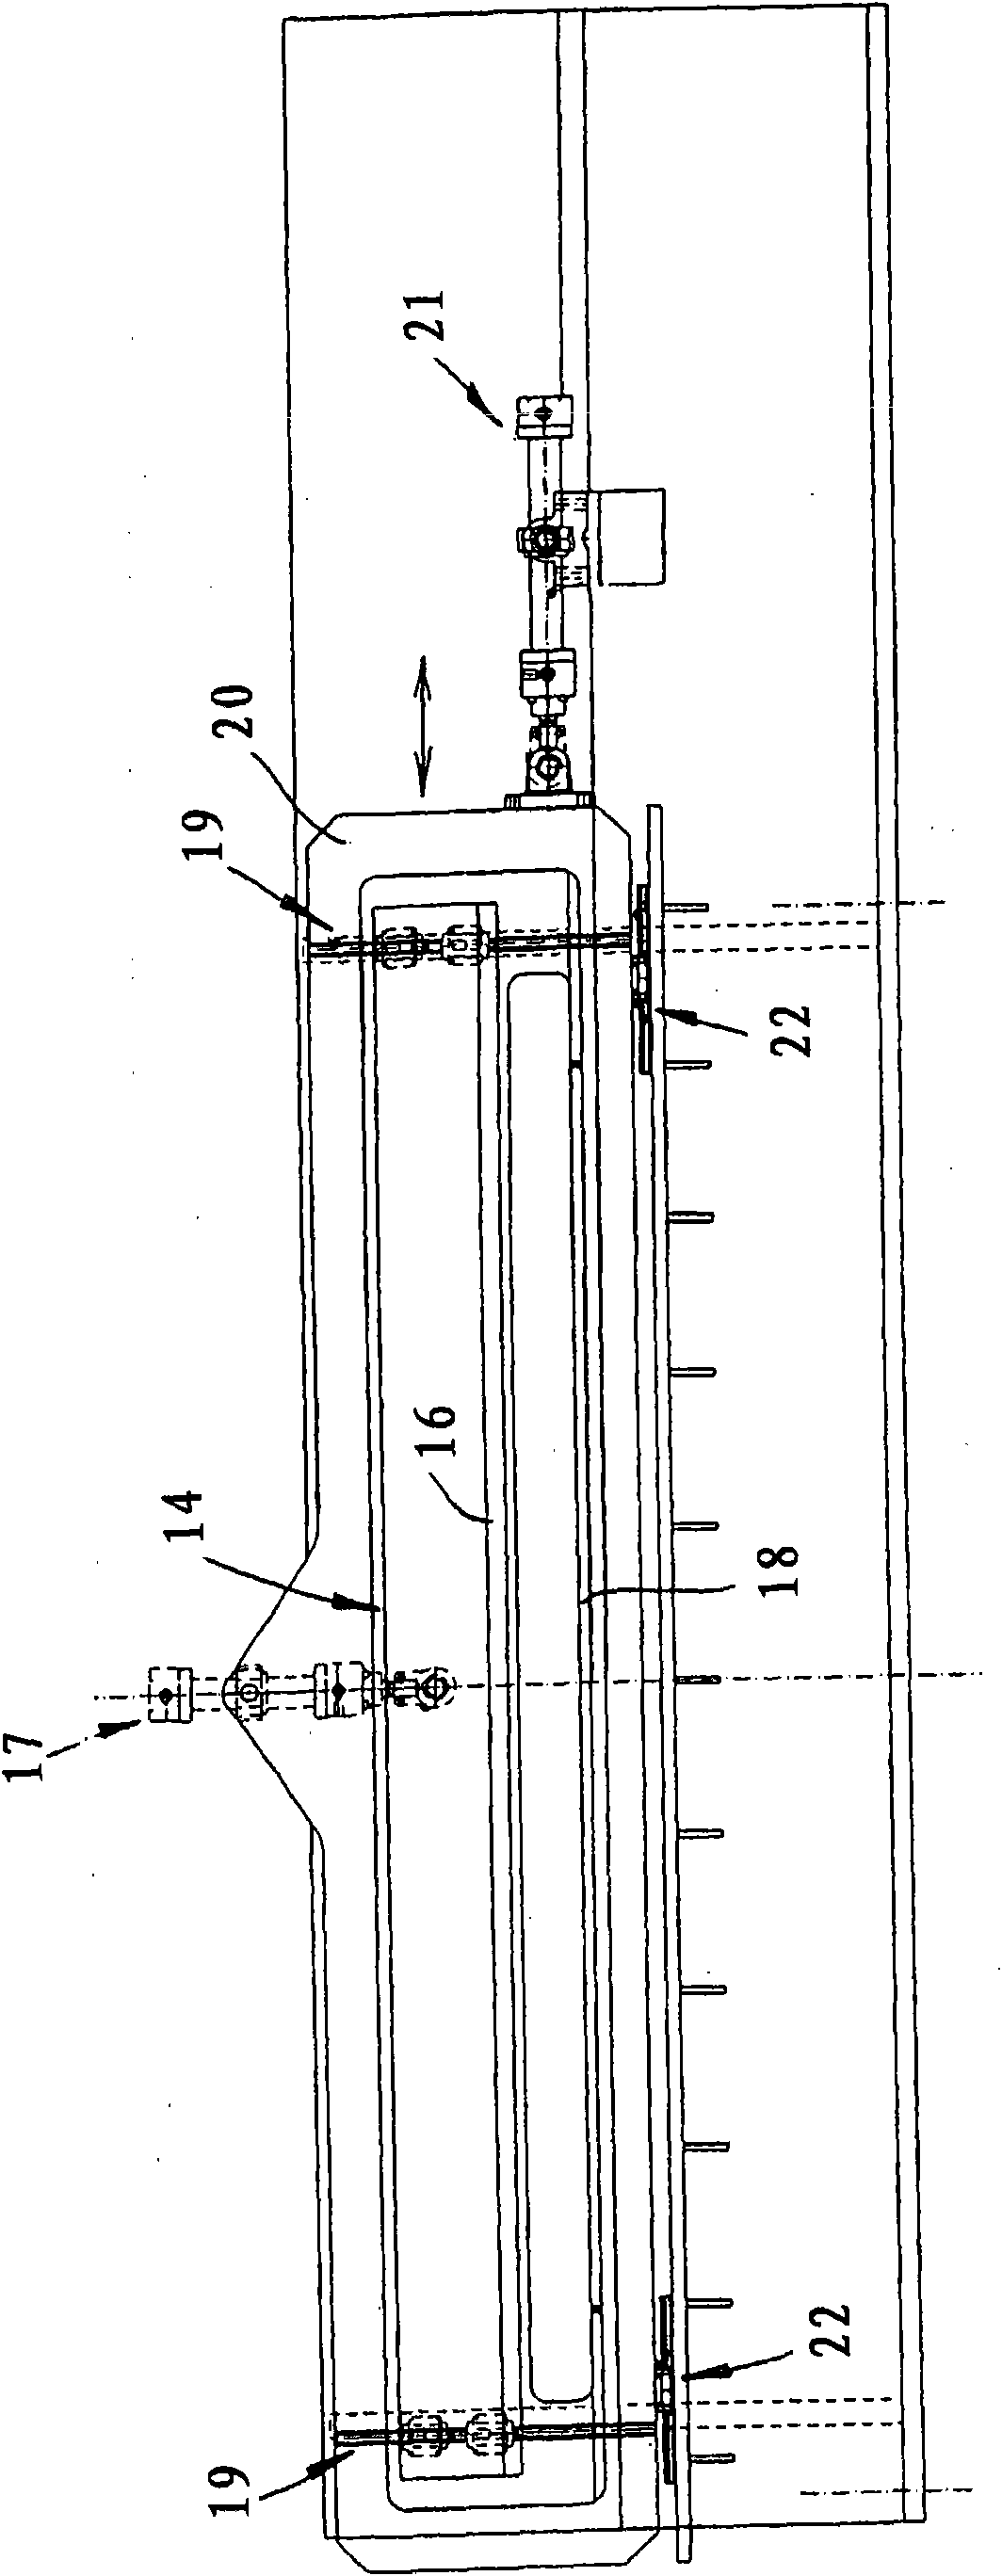 Method of and device for connecting metal bands